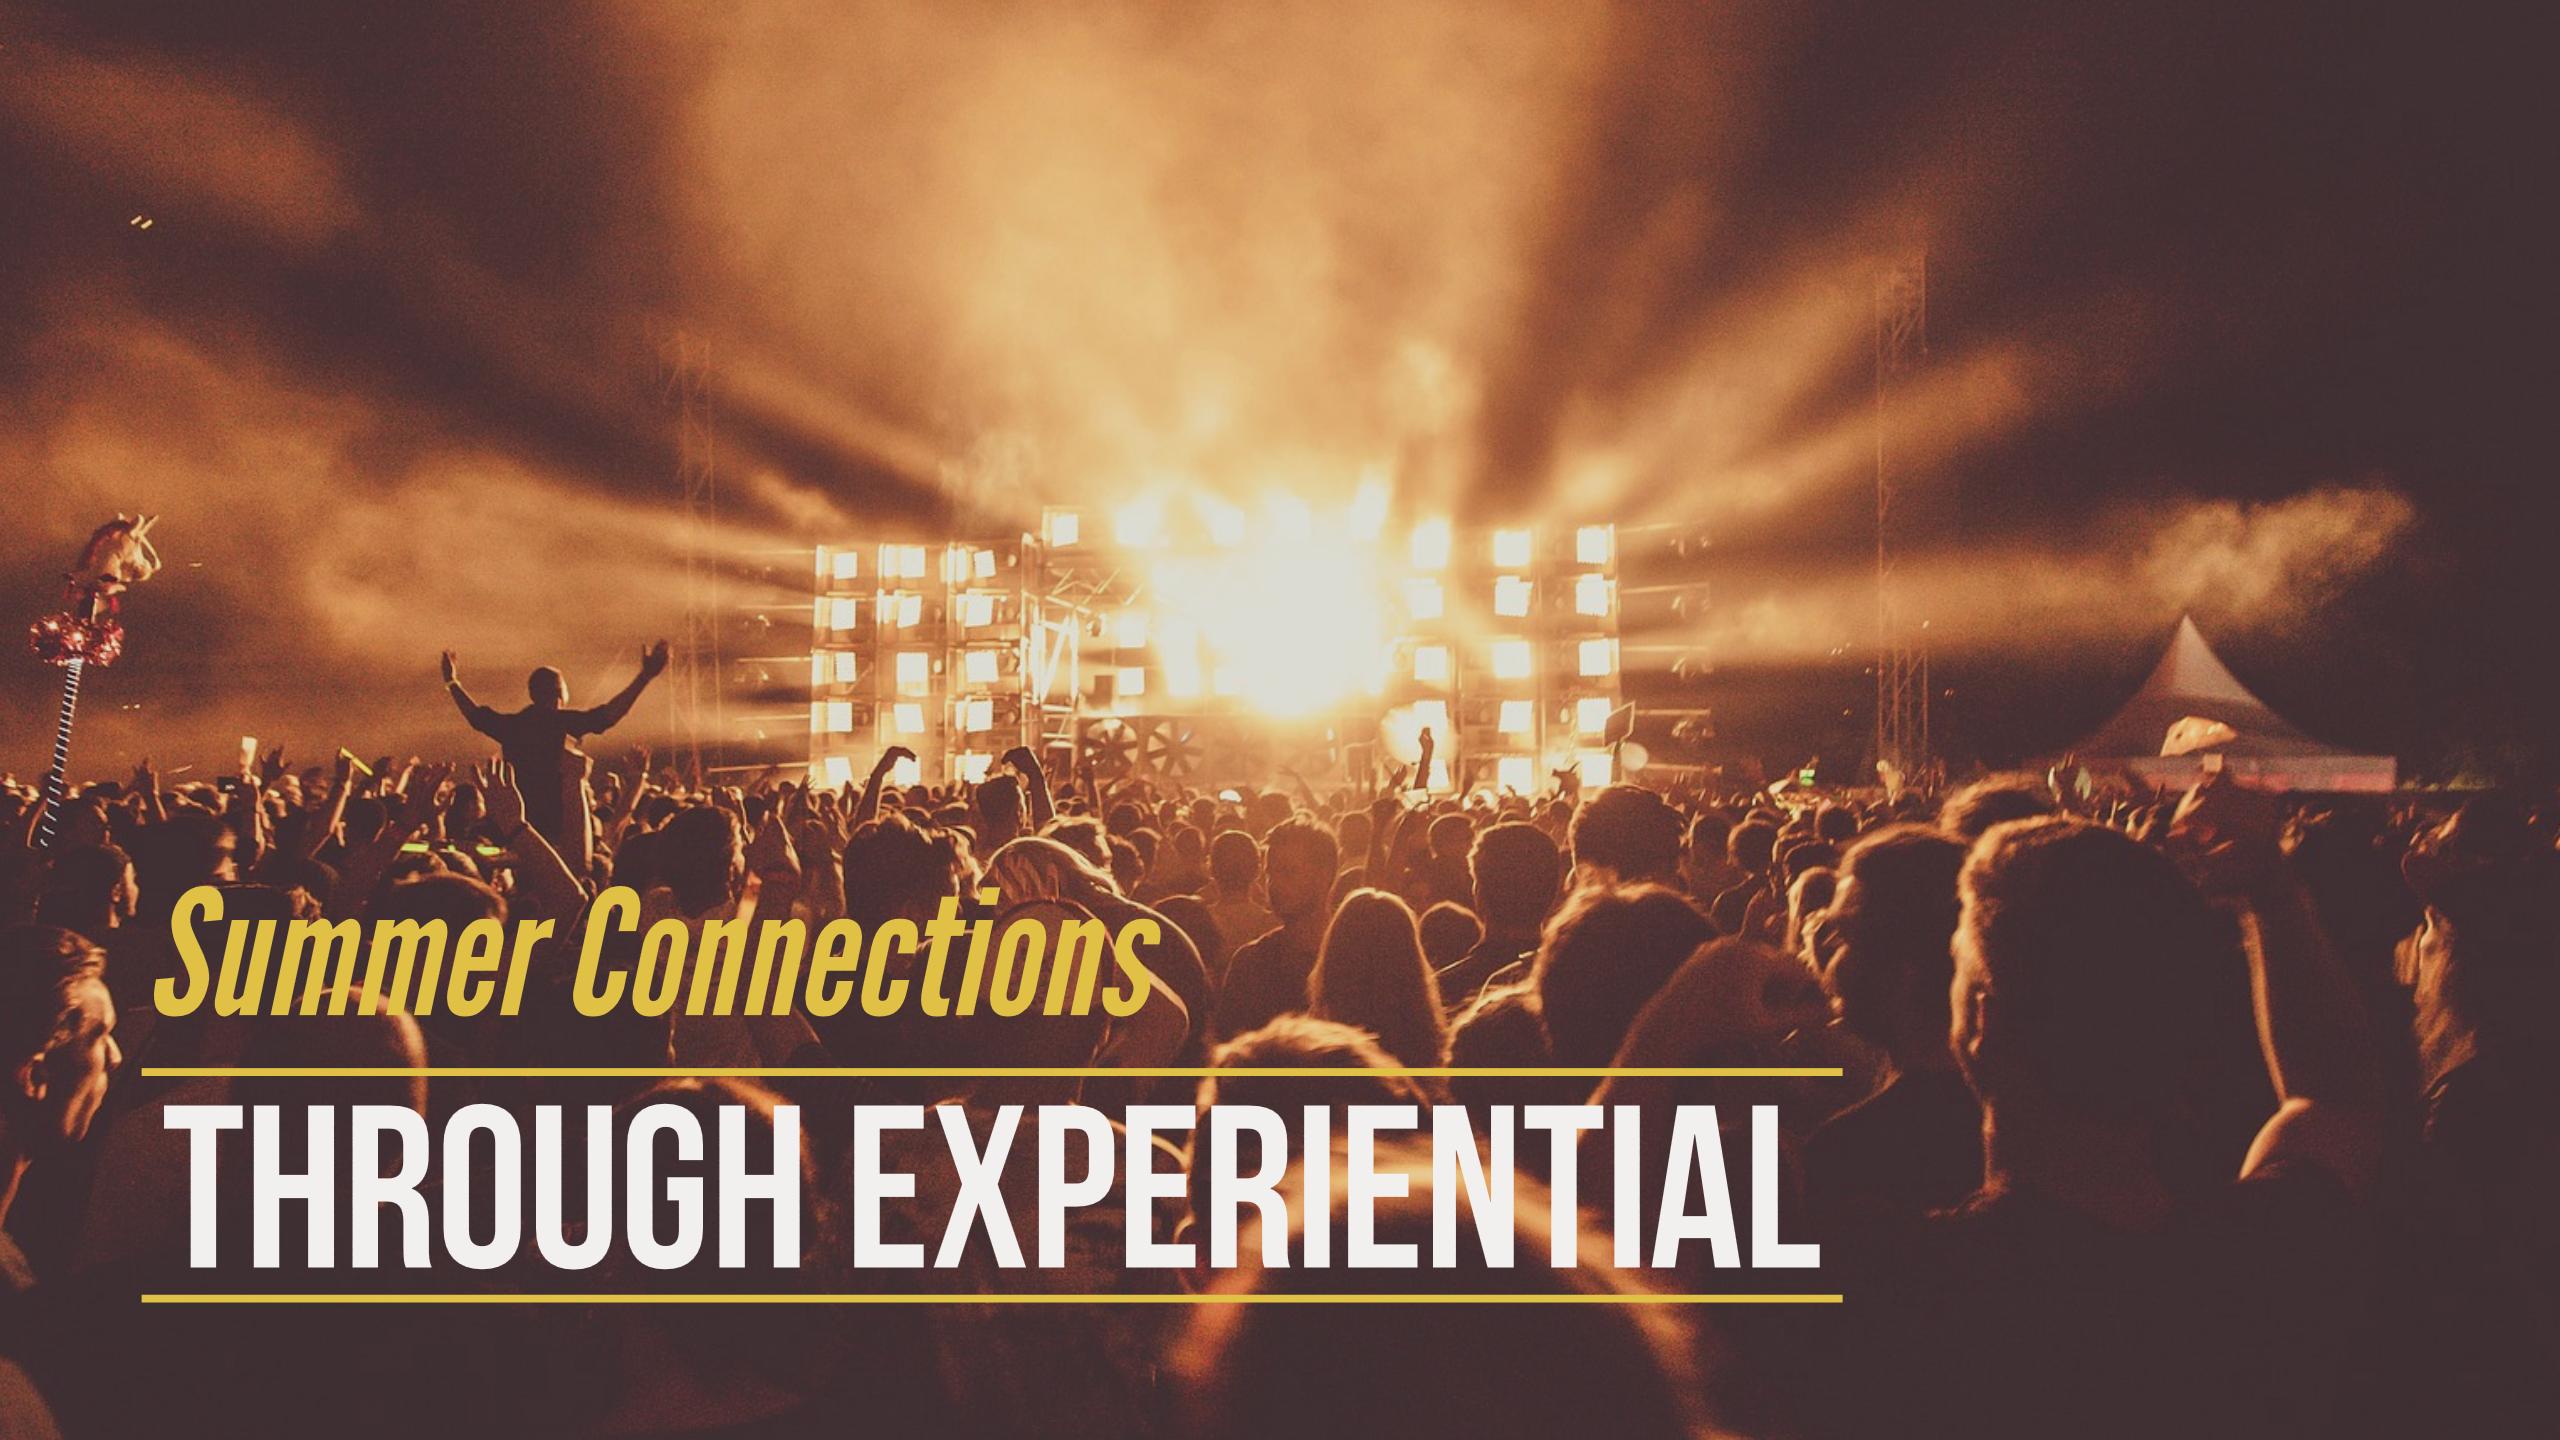 Summer is Coming: Use Experiential to Connect with Your Customer